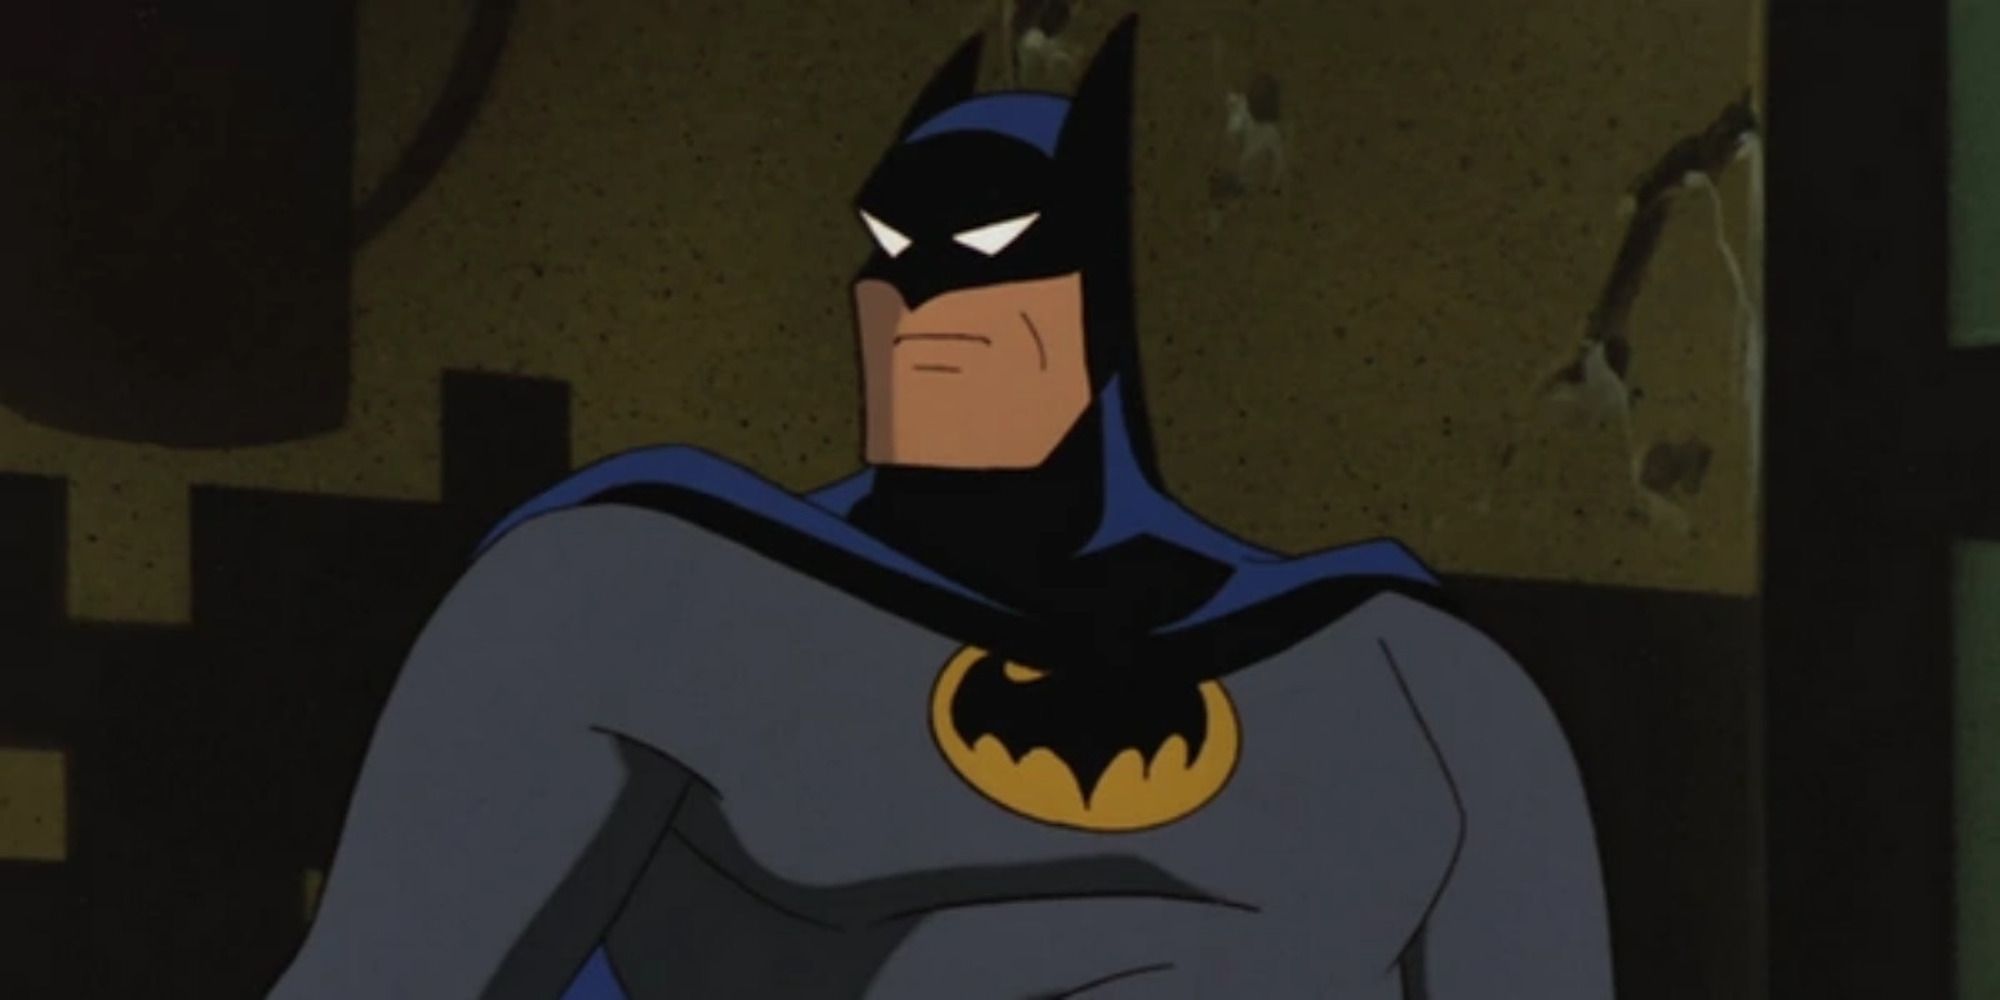 Batman from the animated series